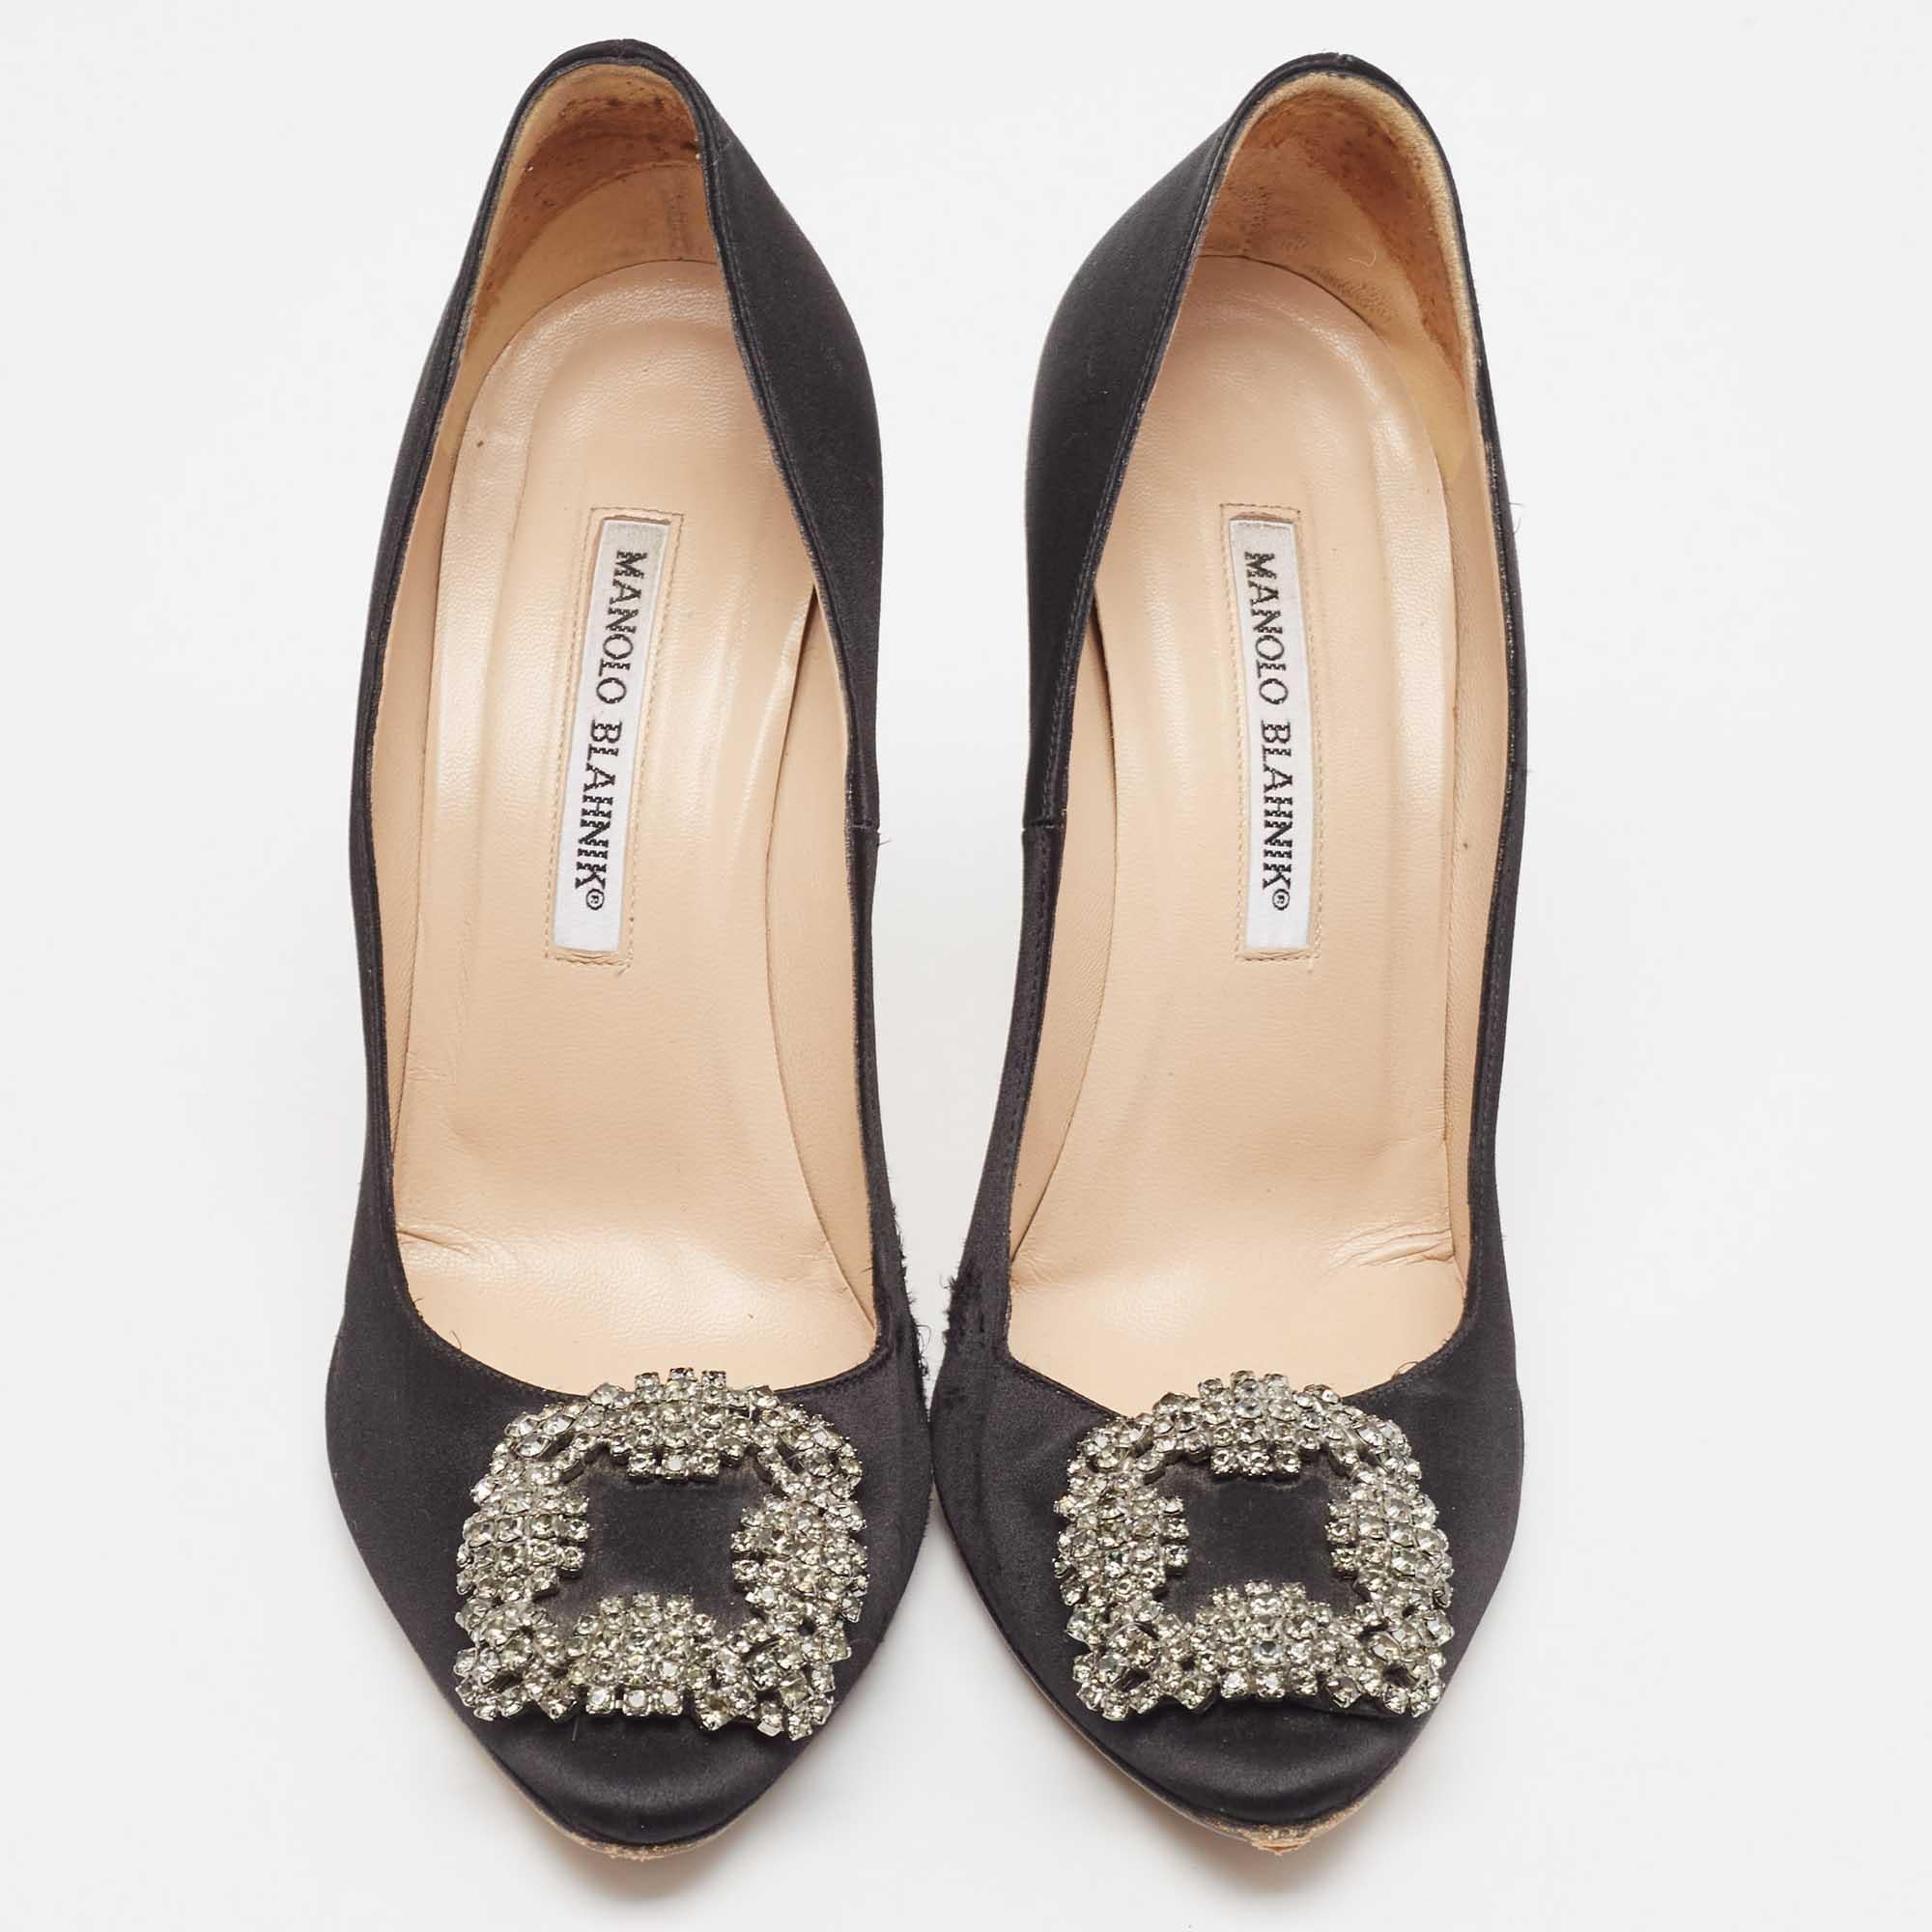 The 11.5cm heels of this pair of Manolo Blahnik pumps will reflect grace and luxury in every step. Made from satin, it is made striking with a crystal-embellished buckle detailing on the toes and exhibits branded insoles.

